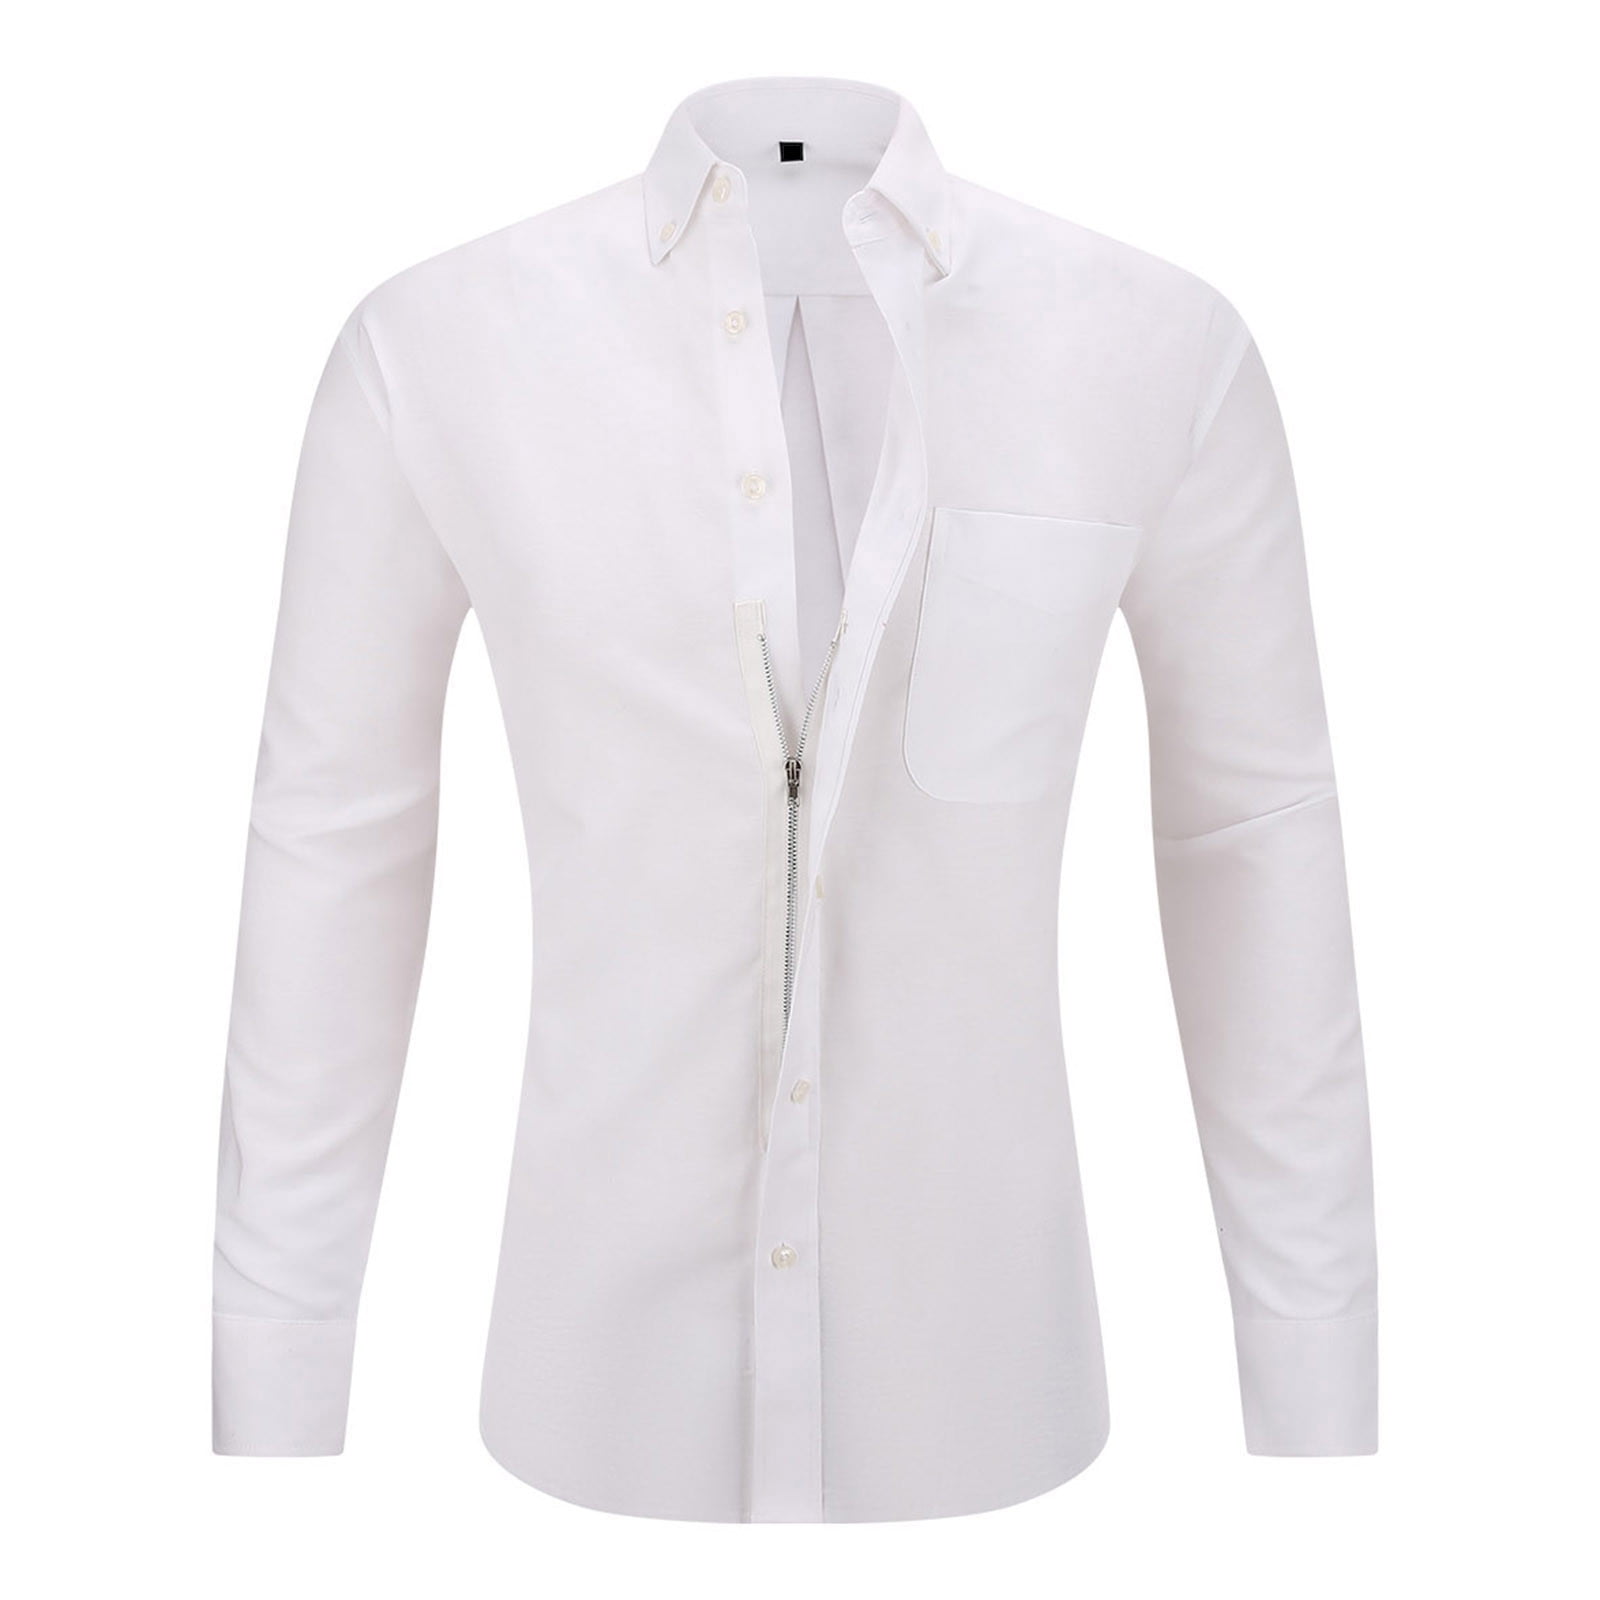 Dressy Tops for Men Long Sleeve Blouses Business Office Work Shirts ...